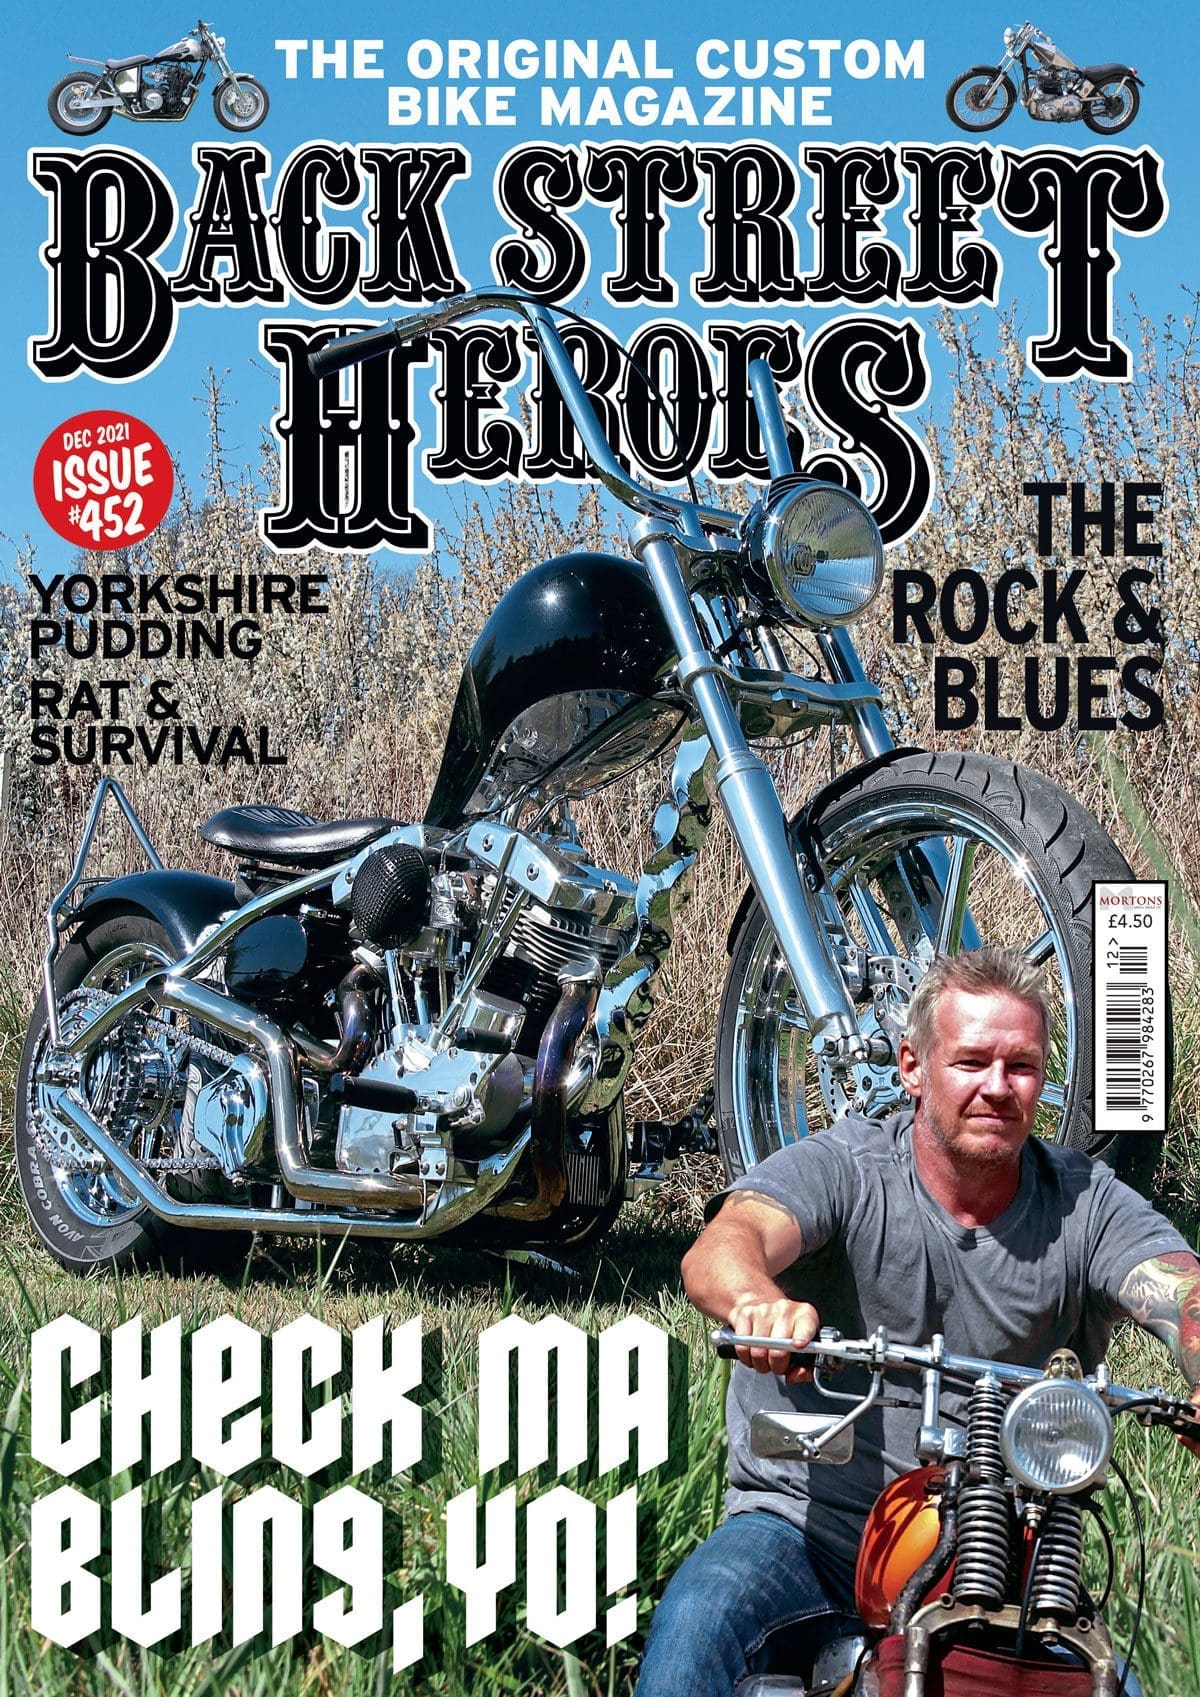 PREVIEW: December issue of Back Street Heroes magazine